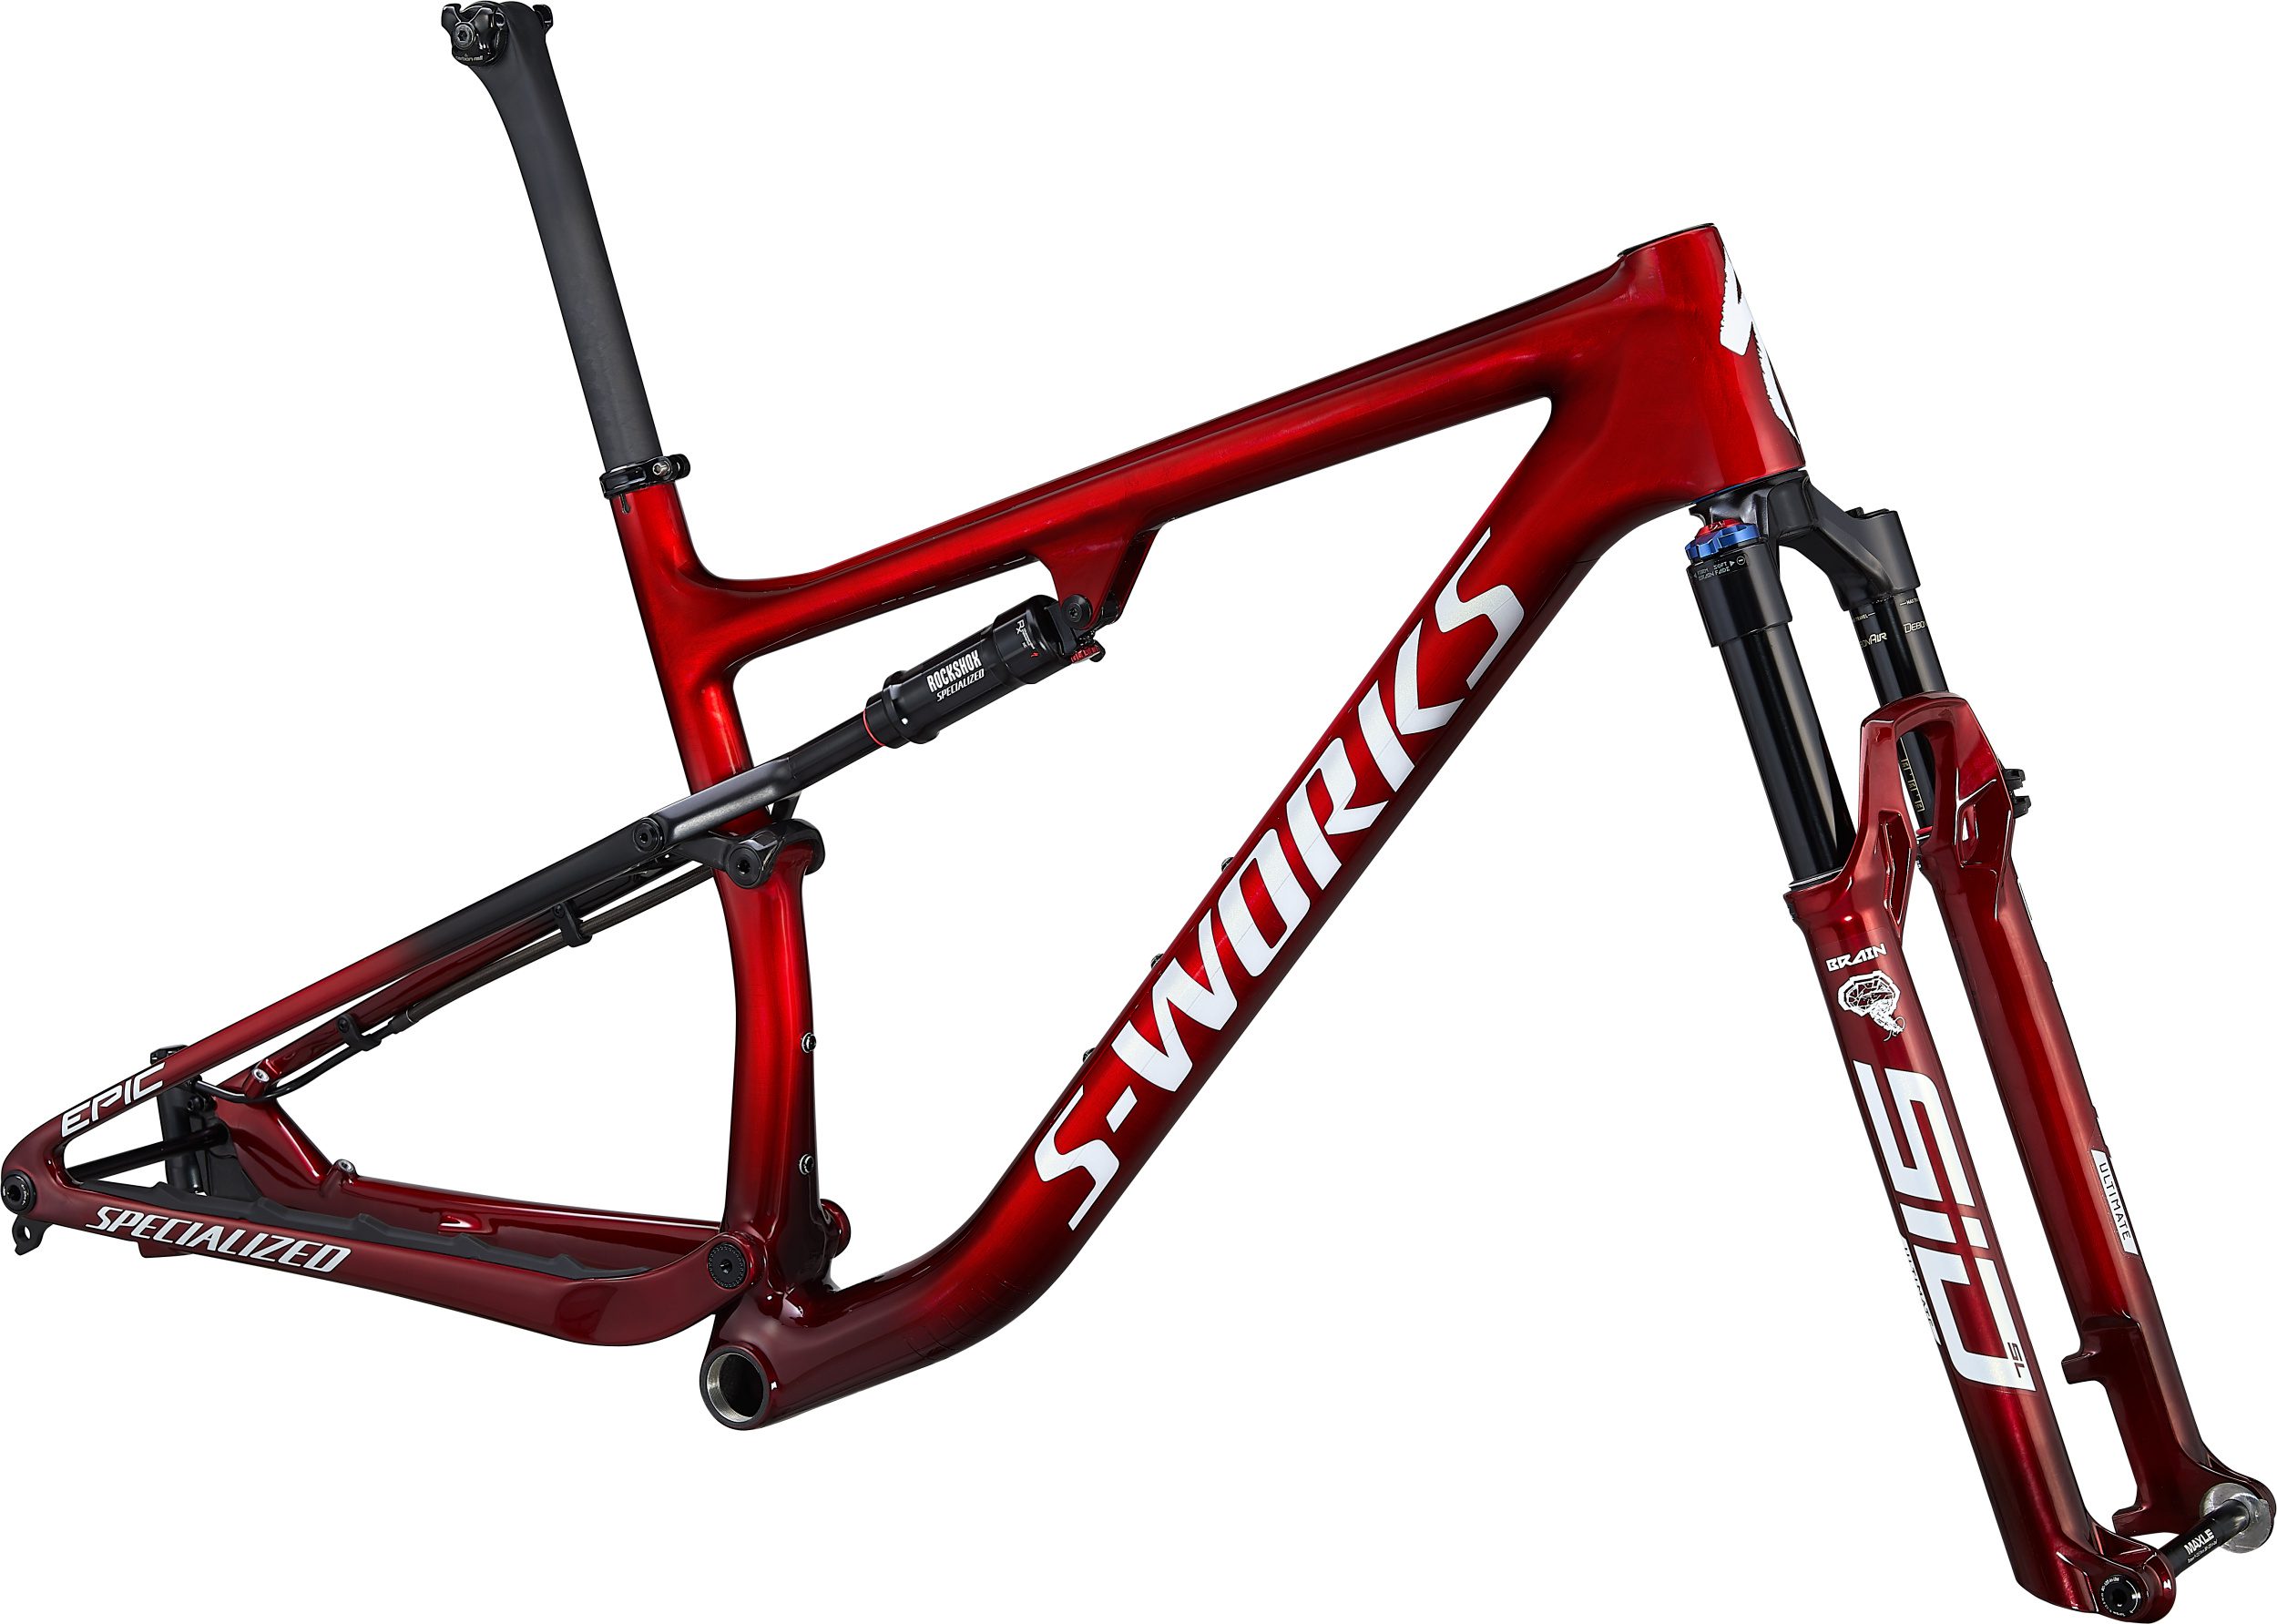 Specialized S-Works Epic Frameset 2021 Frontansicht in der Farbe Gloss Red Tint Fade Over Brushed Silver/Tarmac Black/White w/ Gold Pearl